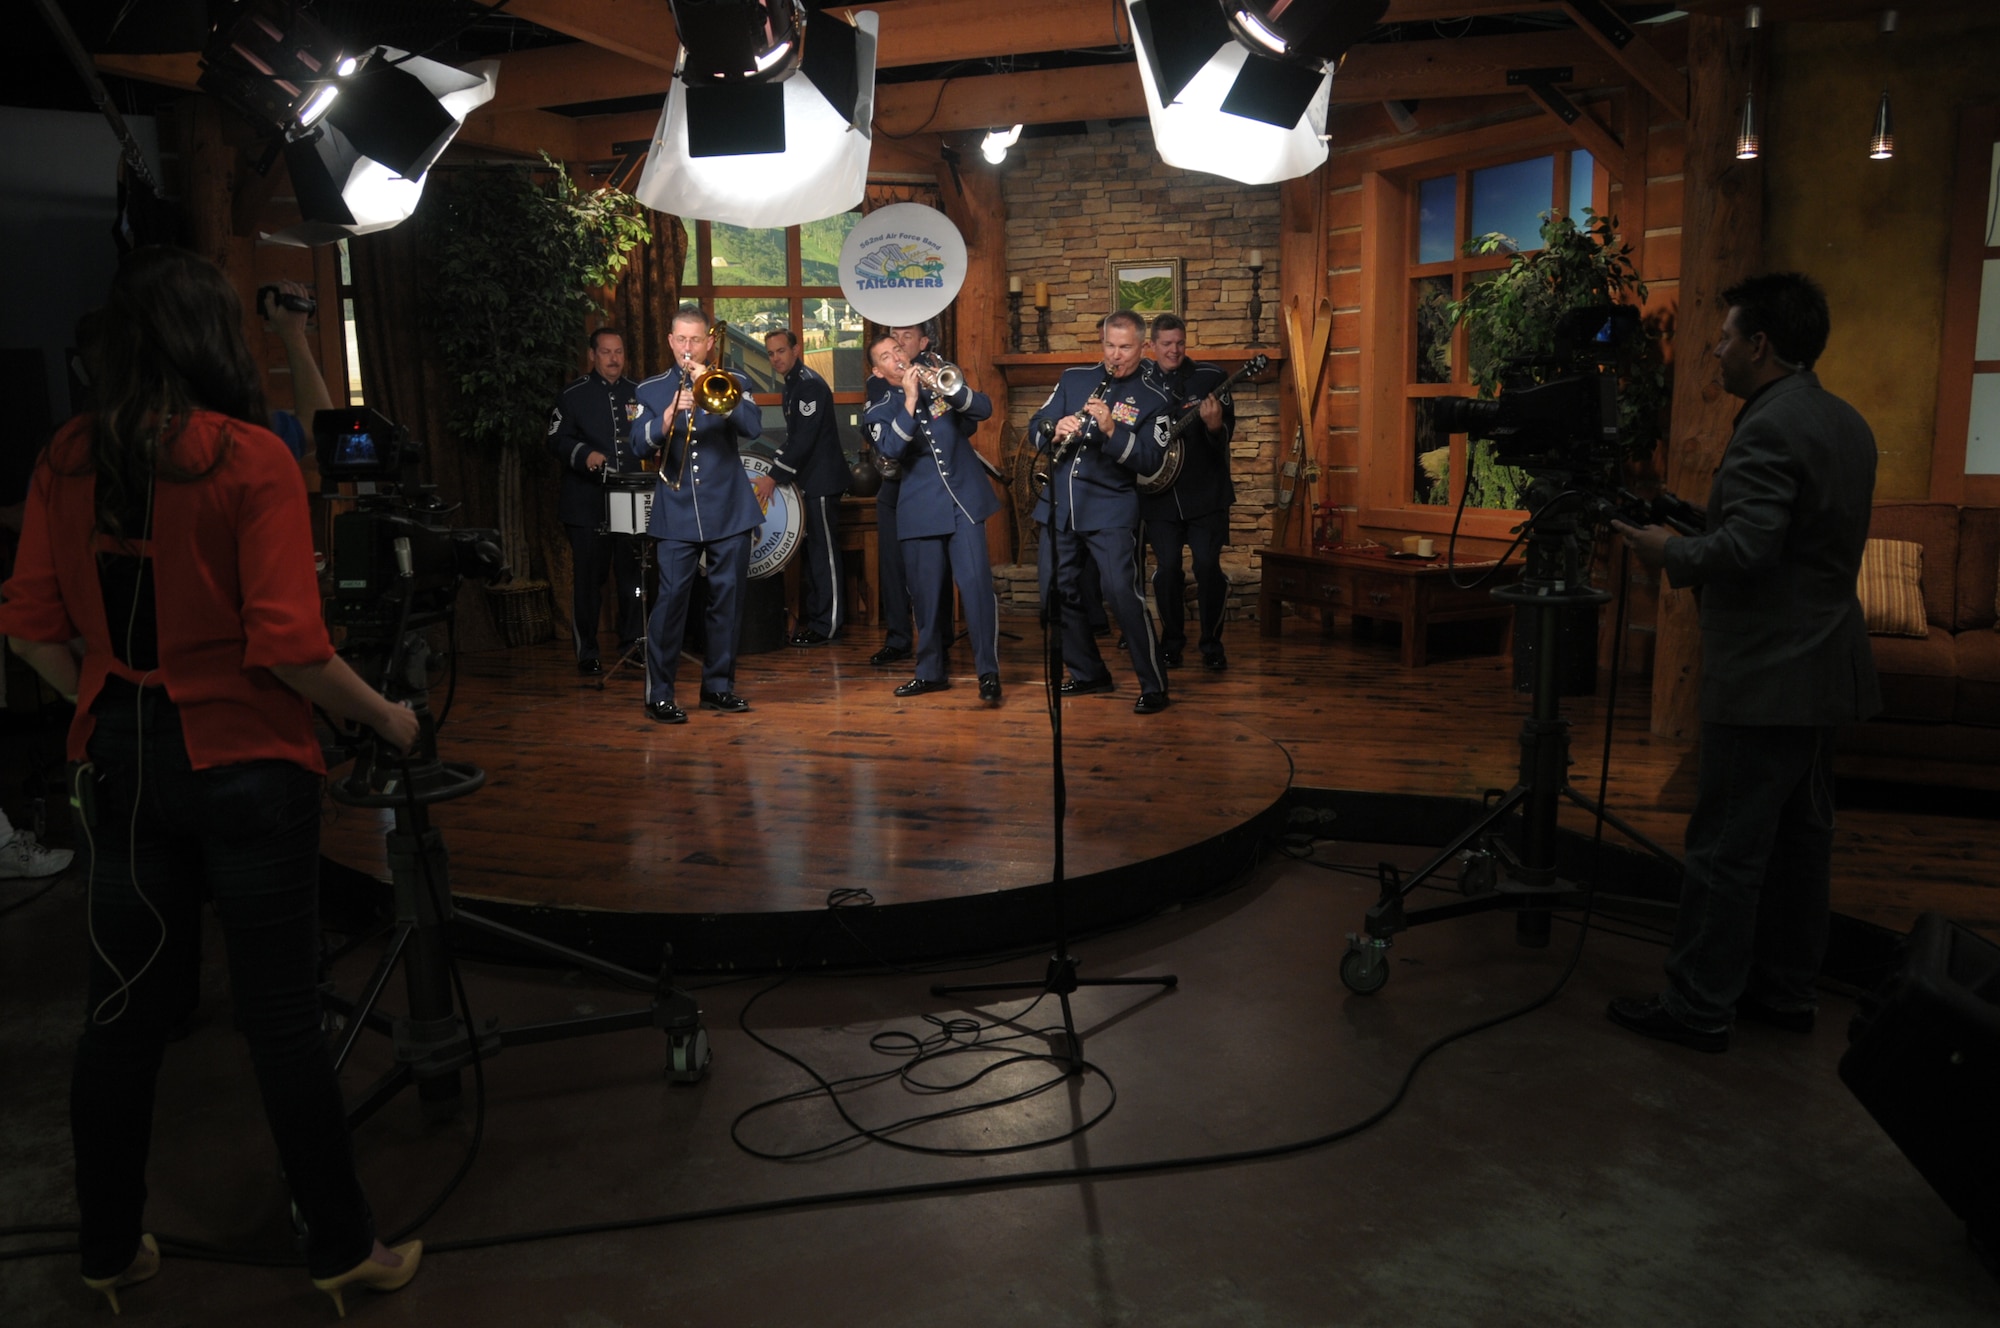 The Tailgaters with the Air National Guard Band of the West Coast perform at the Park City Television Station in Park City, Utah on July 1, 2014. (U.S Air National Guard photo by Airman 1st Class Madeleine Richards/Released)

